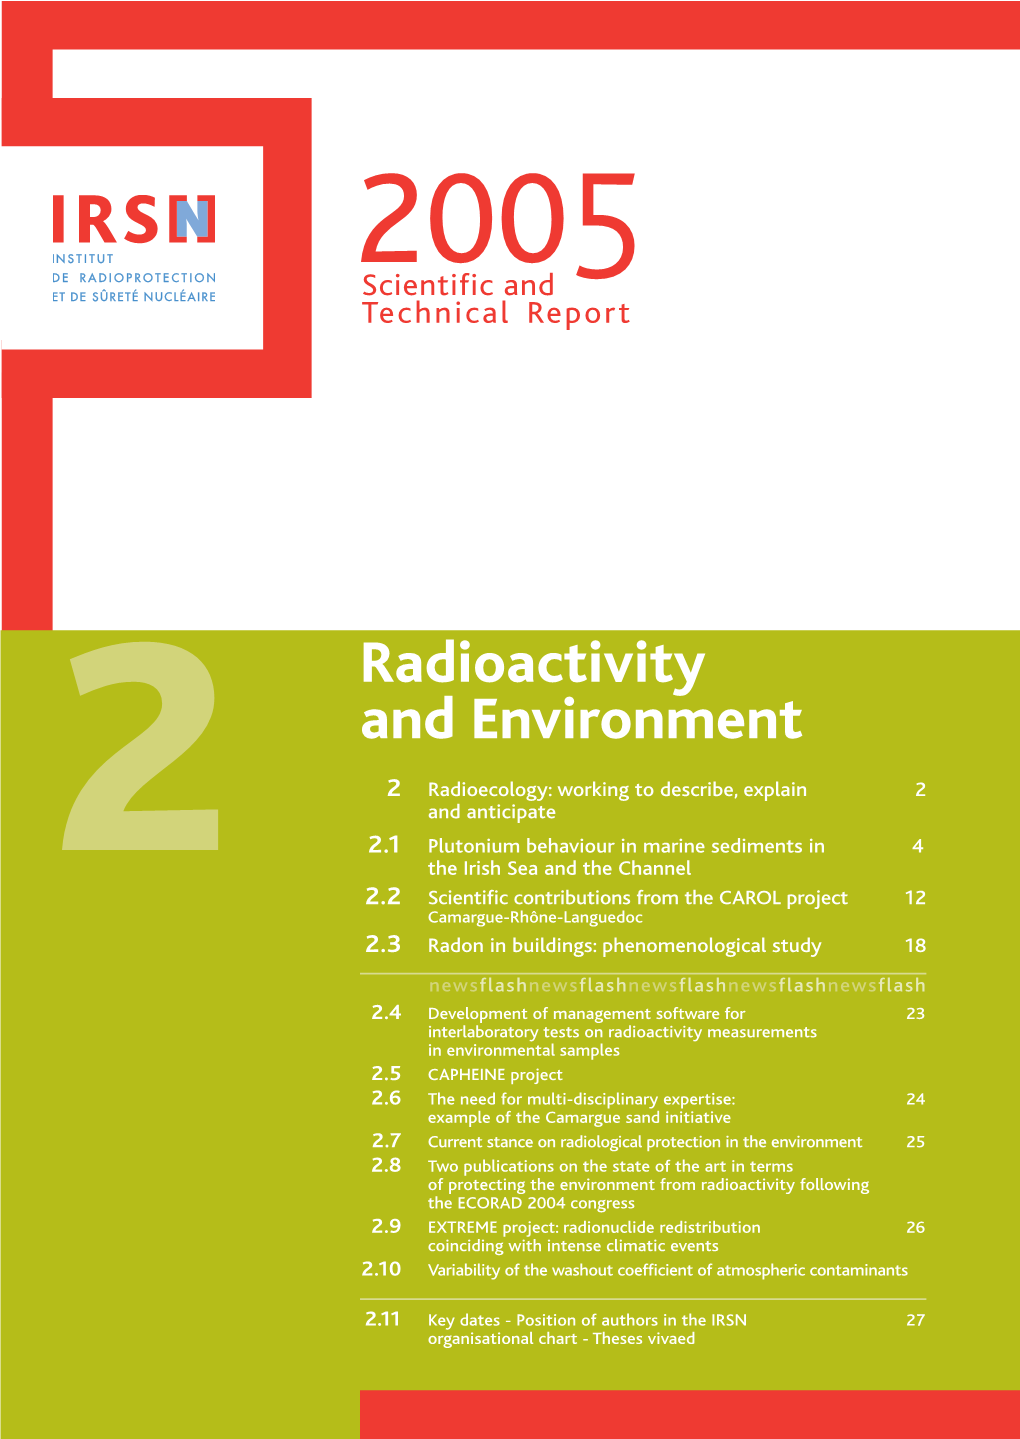 Part of the Scientific and Technical Report 2005 (Pdf